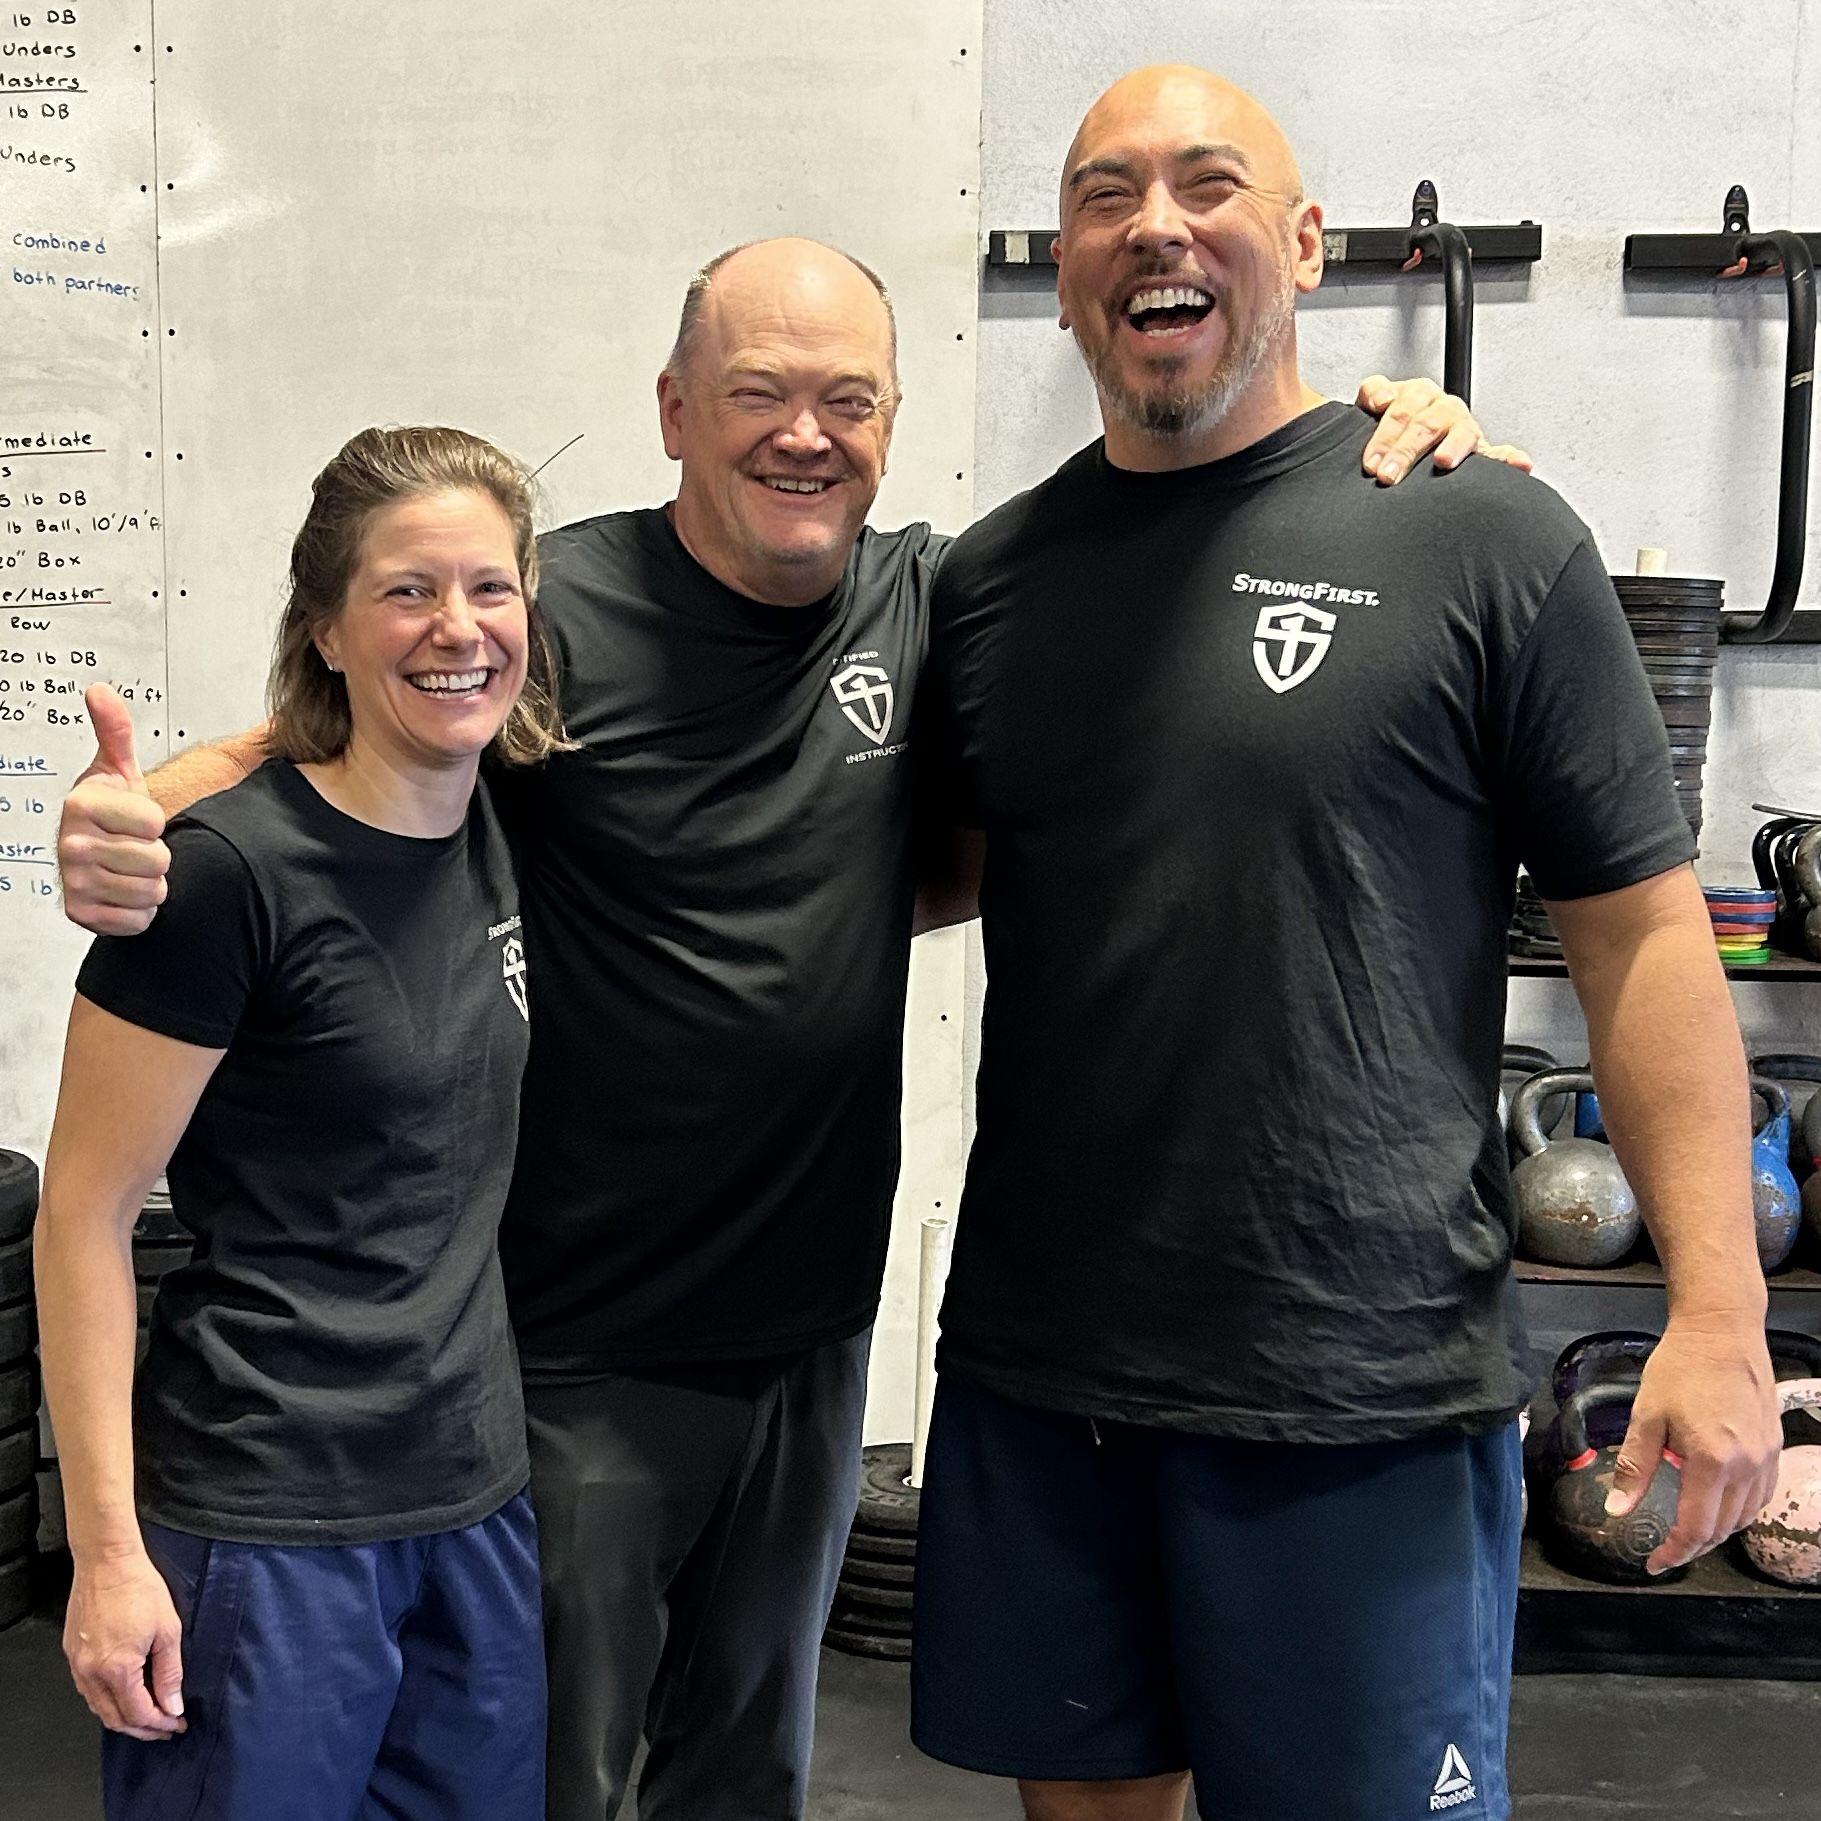 strongfirst instructors sfg sfb